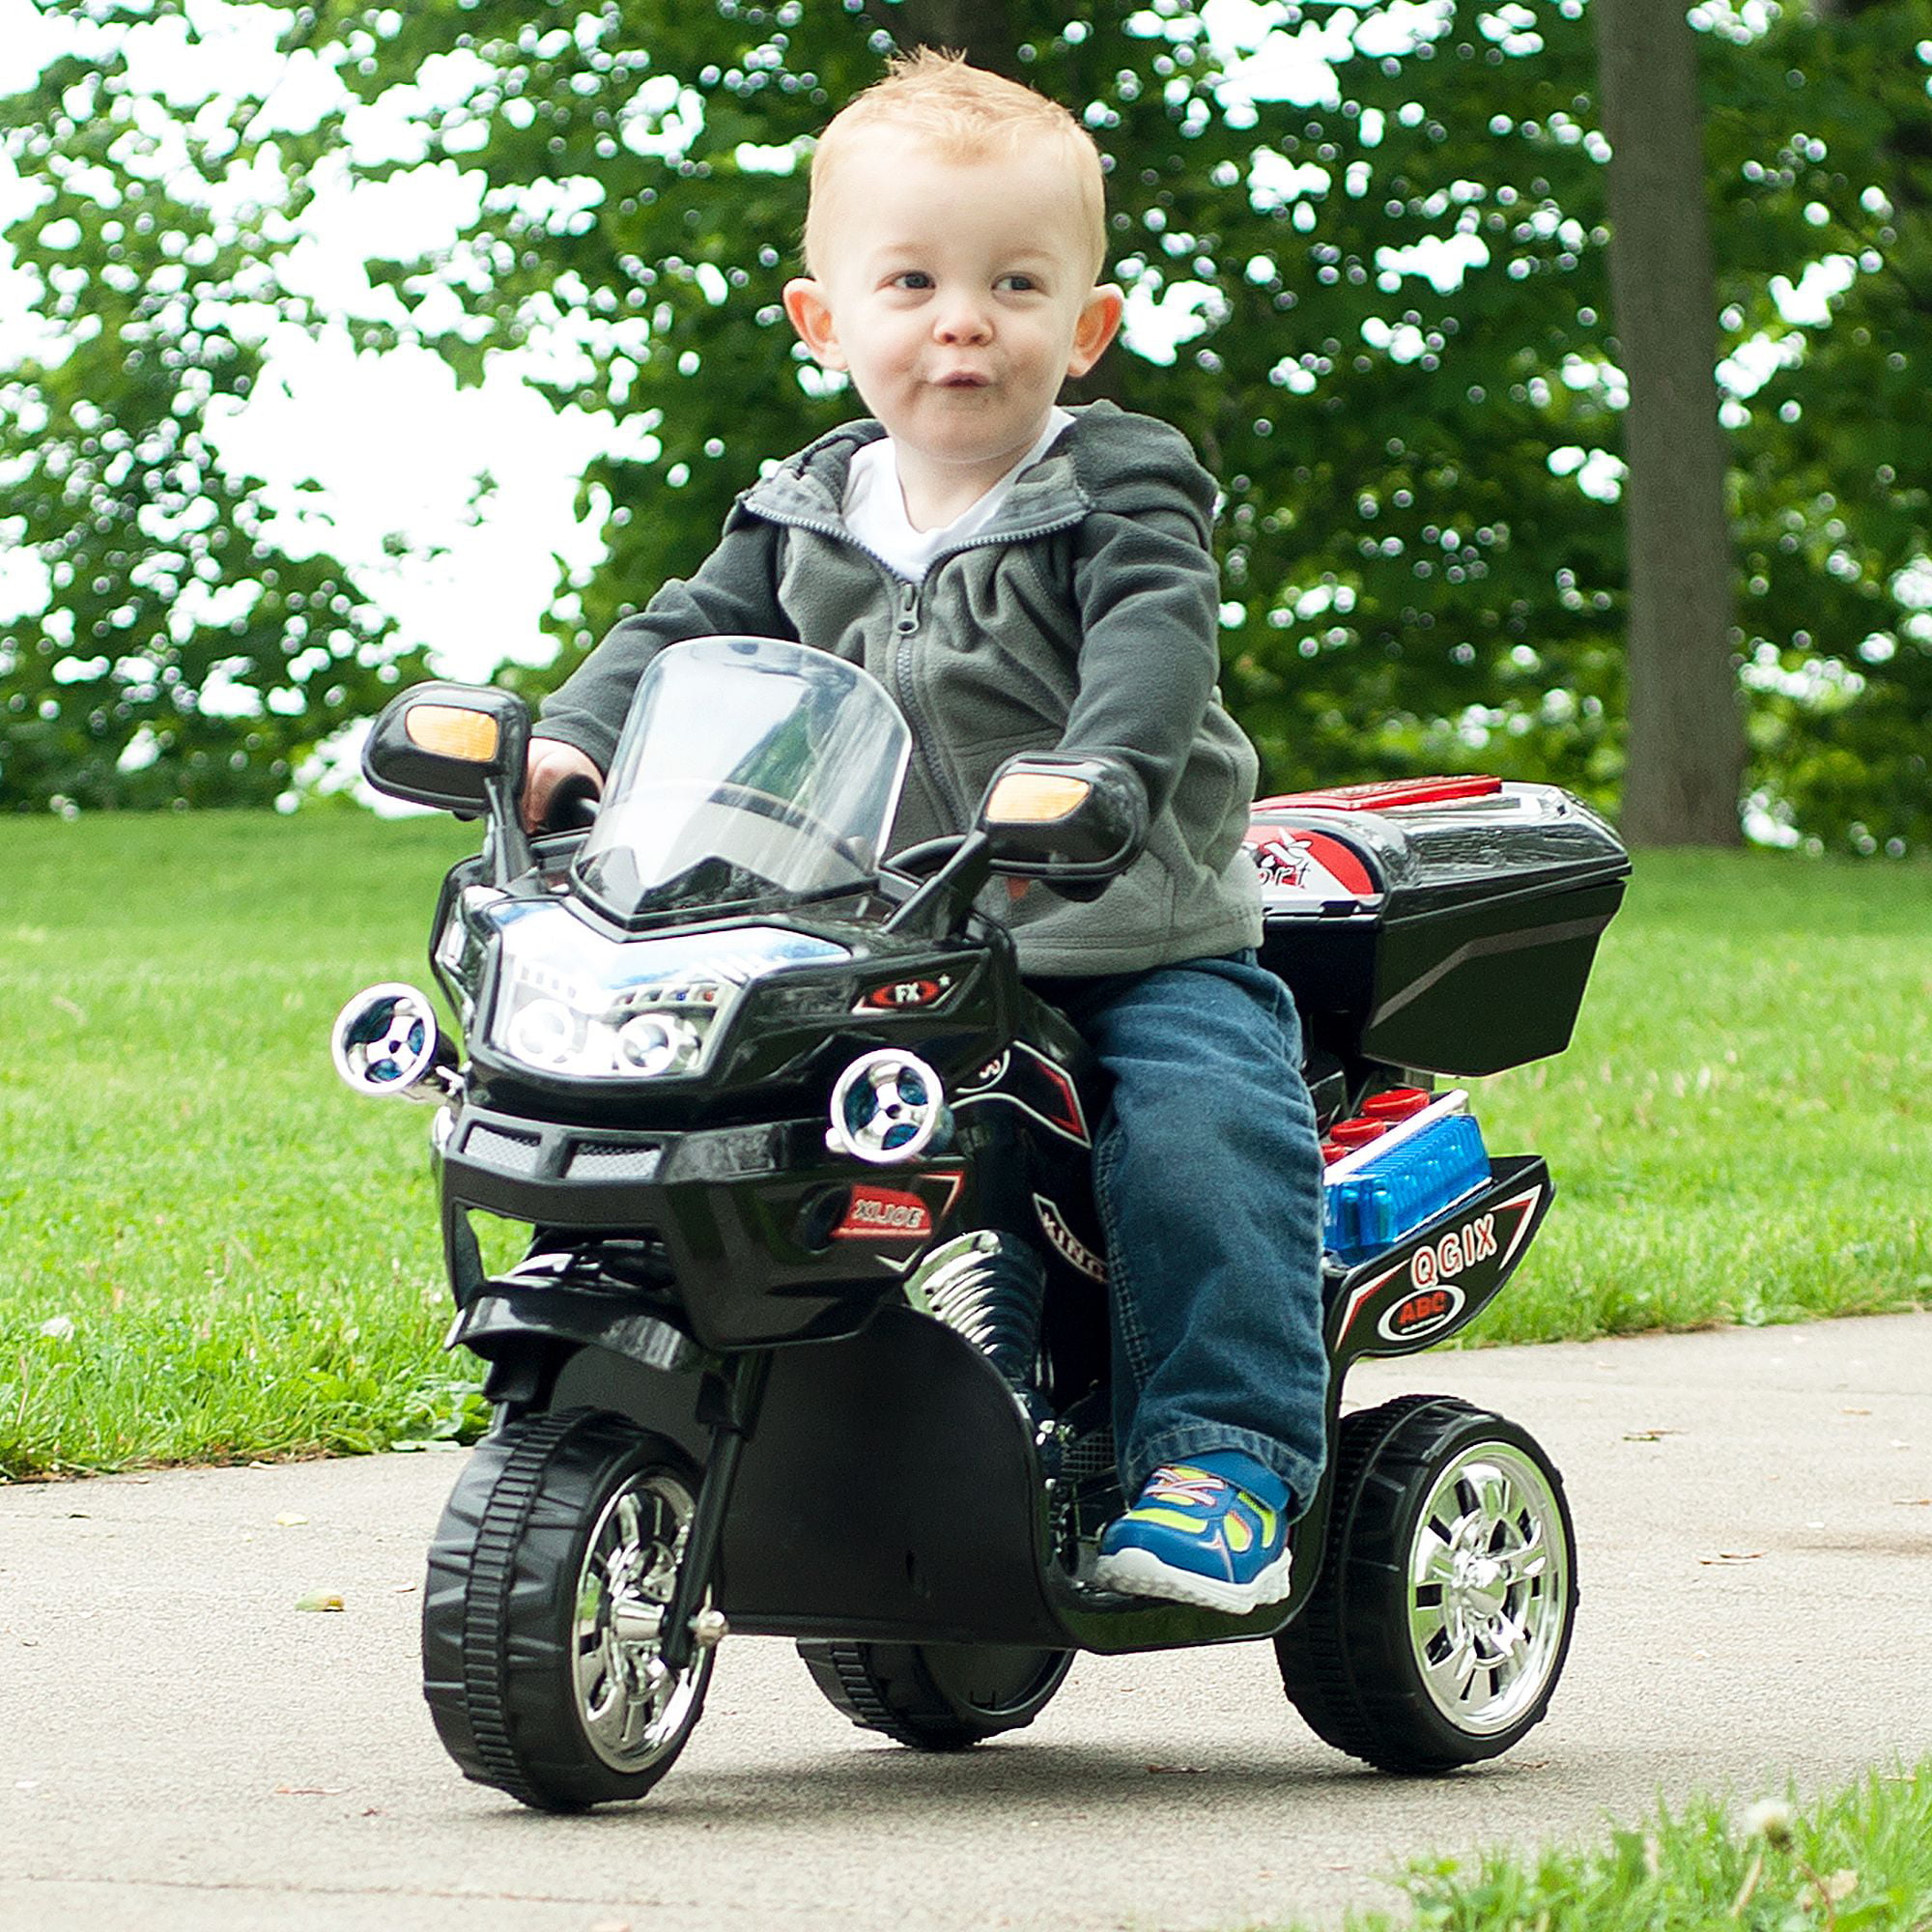 Ride on Toy 3 Wheel Motorcycle for Kids Battery Powered Boys and Girls Black FX for sale online 